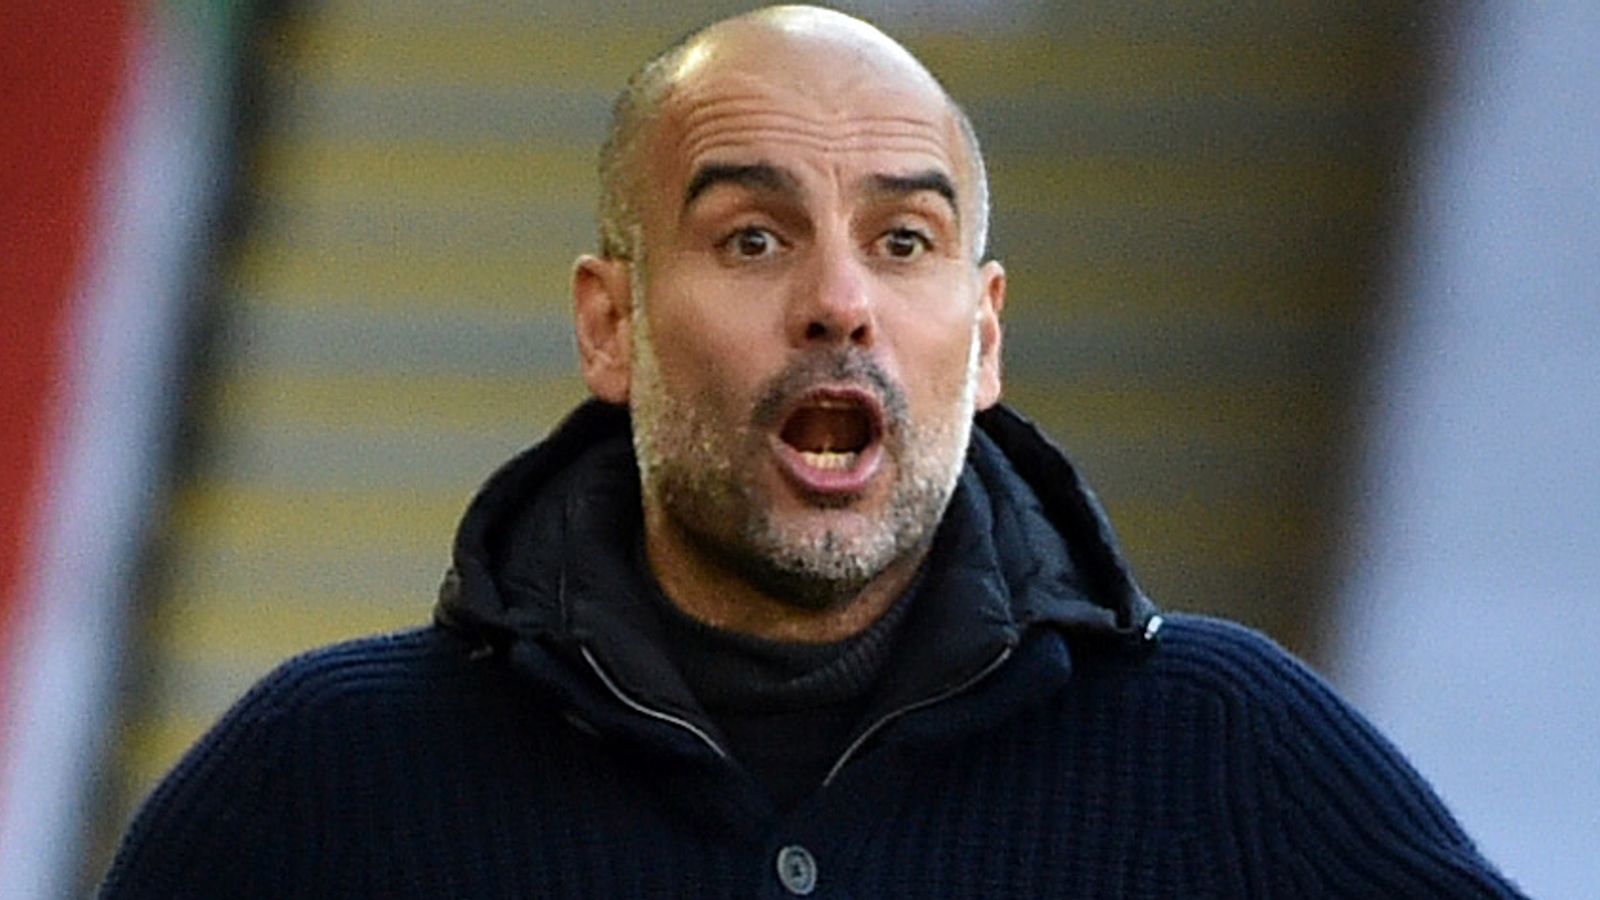 pep-guardiola-explains-why-manchester-city-will-sign-no-players-in-january-transfer-window